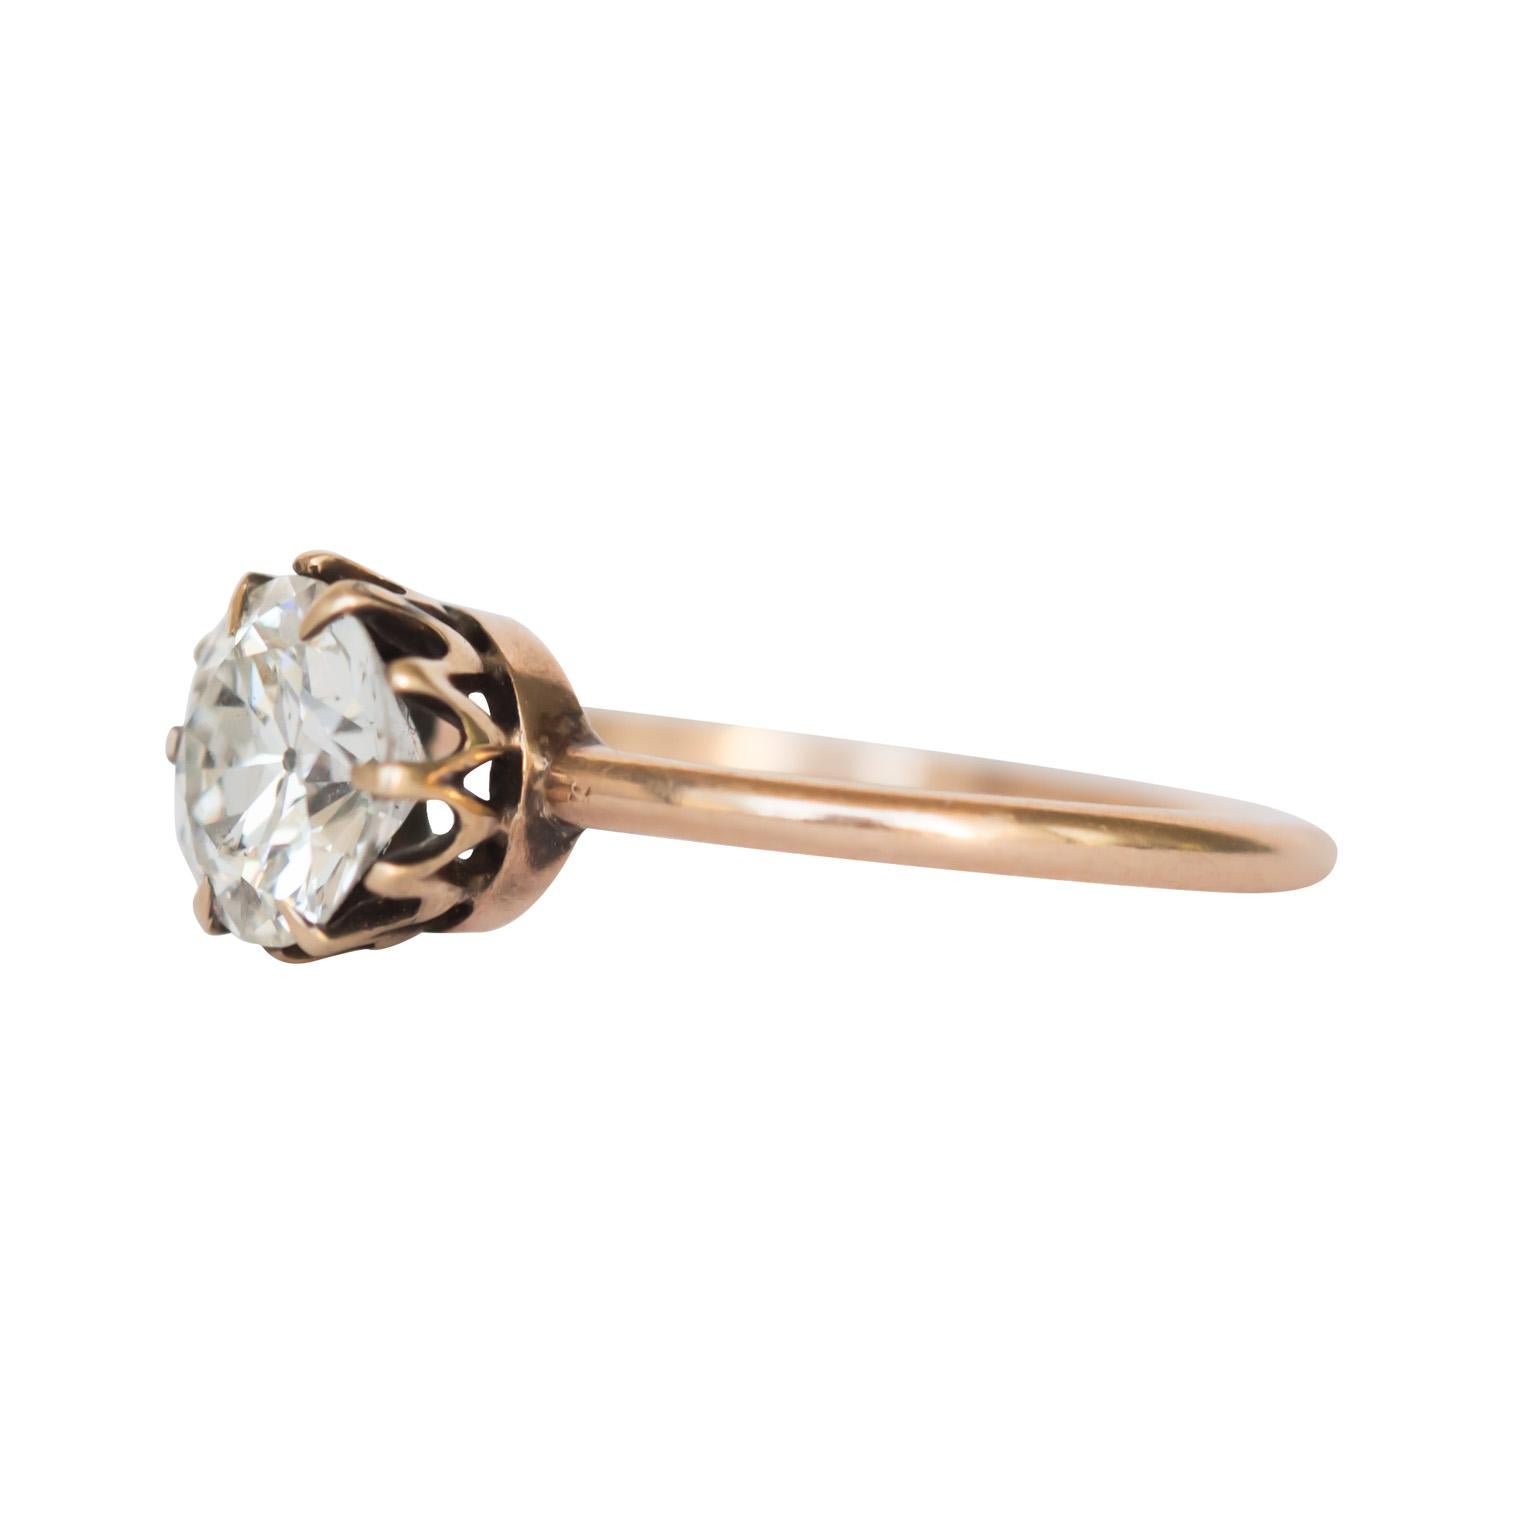 Item Details: 
Ring Size: 5.5
Metal Type: 14 karat yellow gold [tested]
Weight: 1.8 grams

Center Diamond Details
GIA Center Diamond - Report # 5201418171
Shape:  Old European 
Carat Weight: 1.08 carat
Color: H
Clarity: SI2

Finger to Top of Stone